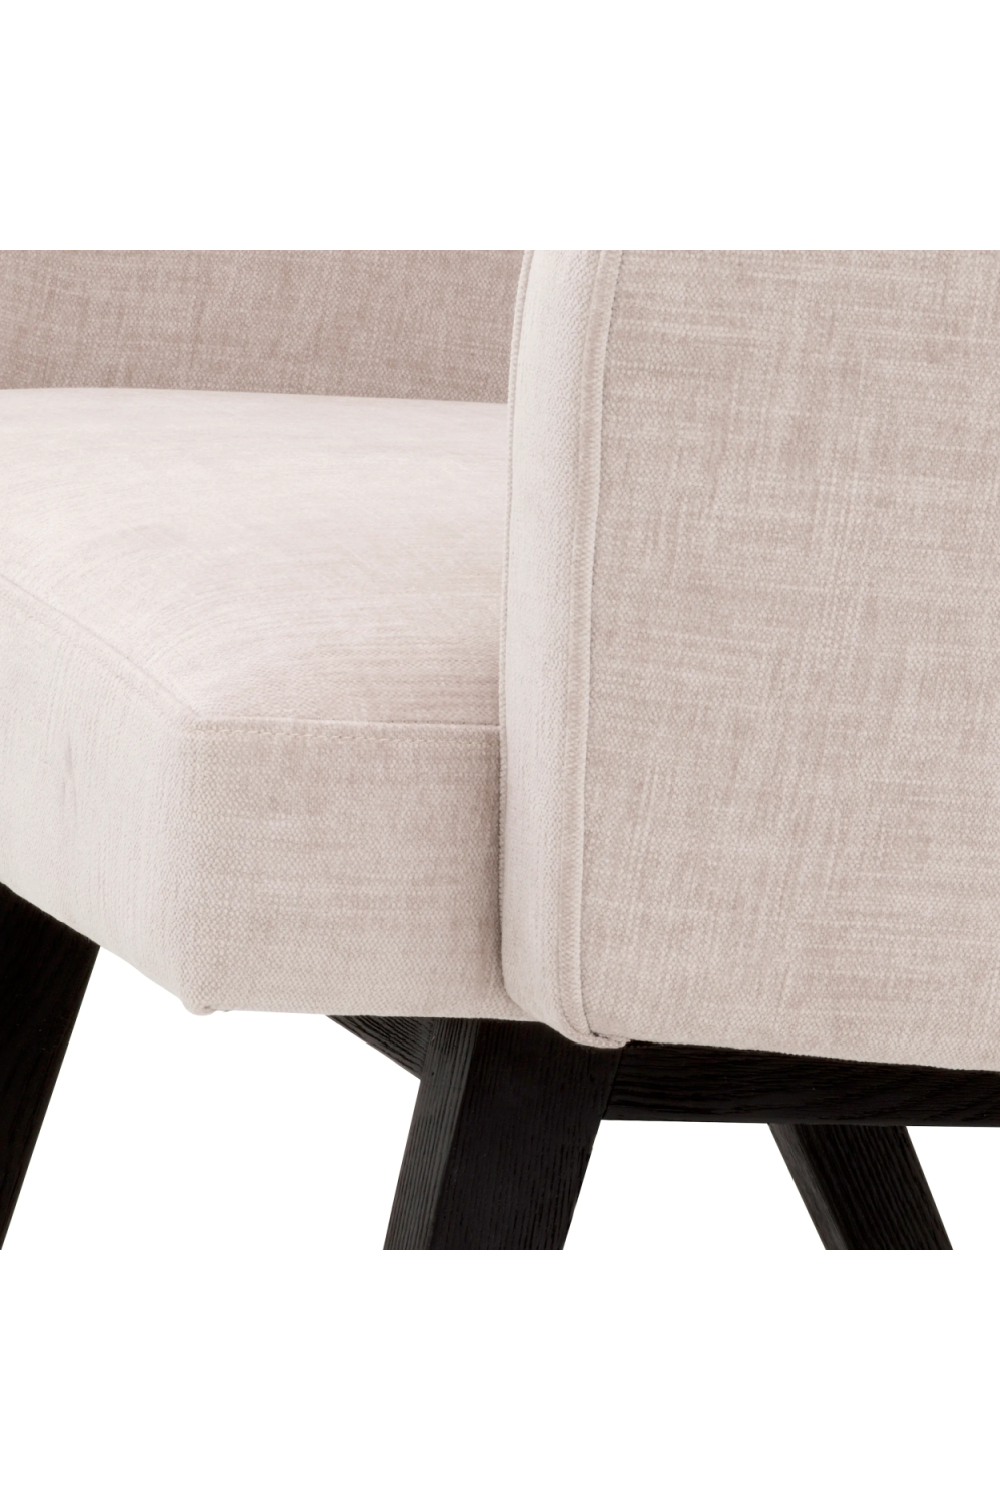 Buttoned Back Dining Chair | Eichholtz Locarno | Oroa.com